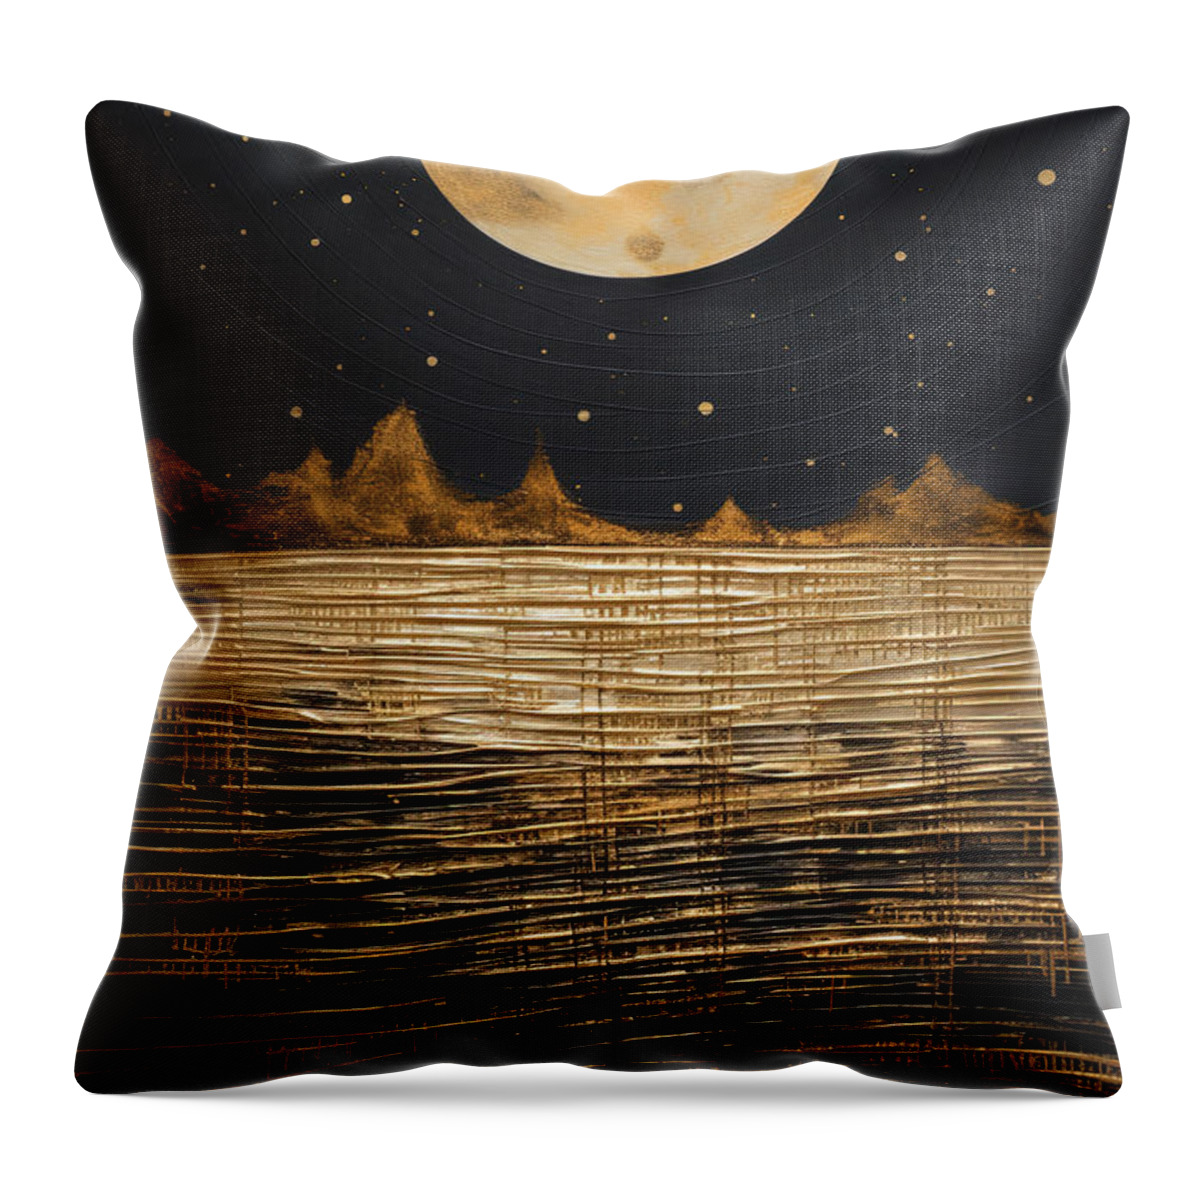 Black And Gold Seascape With Huge Golden Moon Throw Pillow featuring the painting Black and Gold Ocean Painting by Lourry Legarde